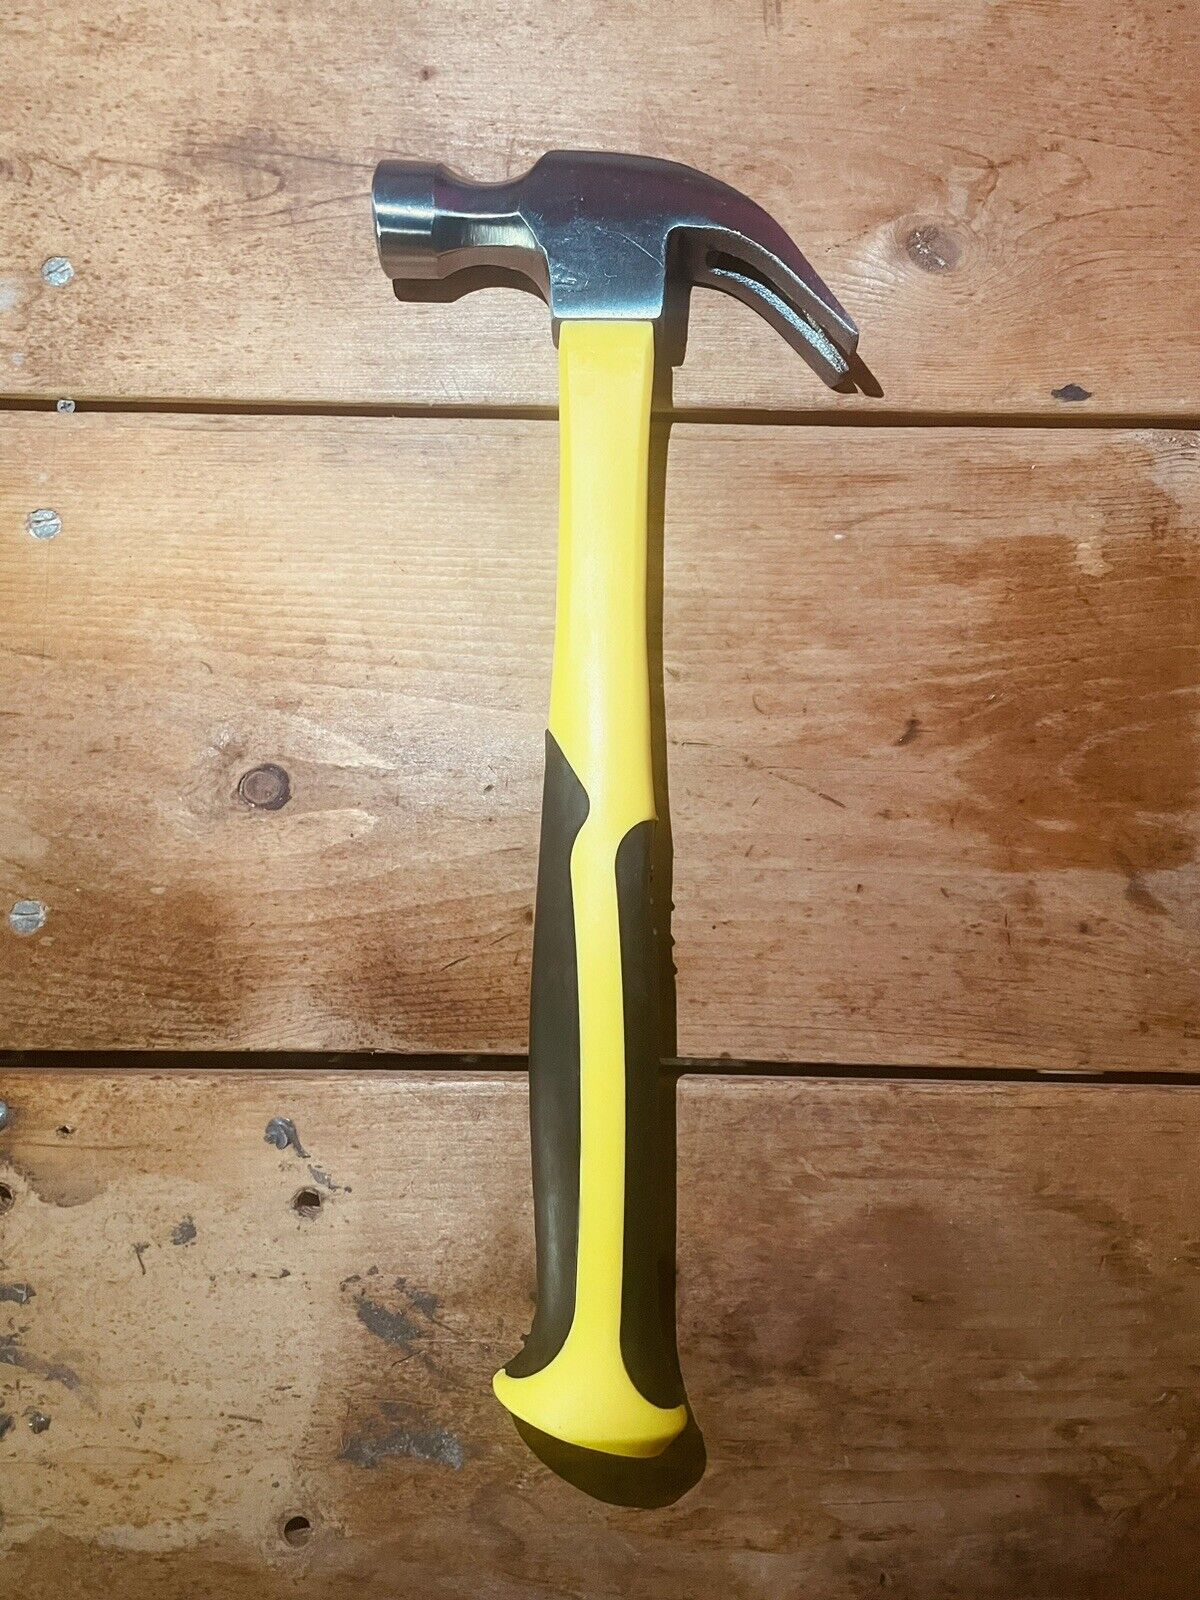 Stanley Claw Hammer Number 13” Yellow Black Rubber Grip Handle Great Condition